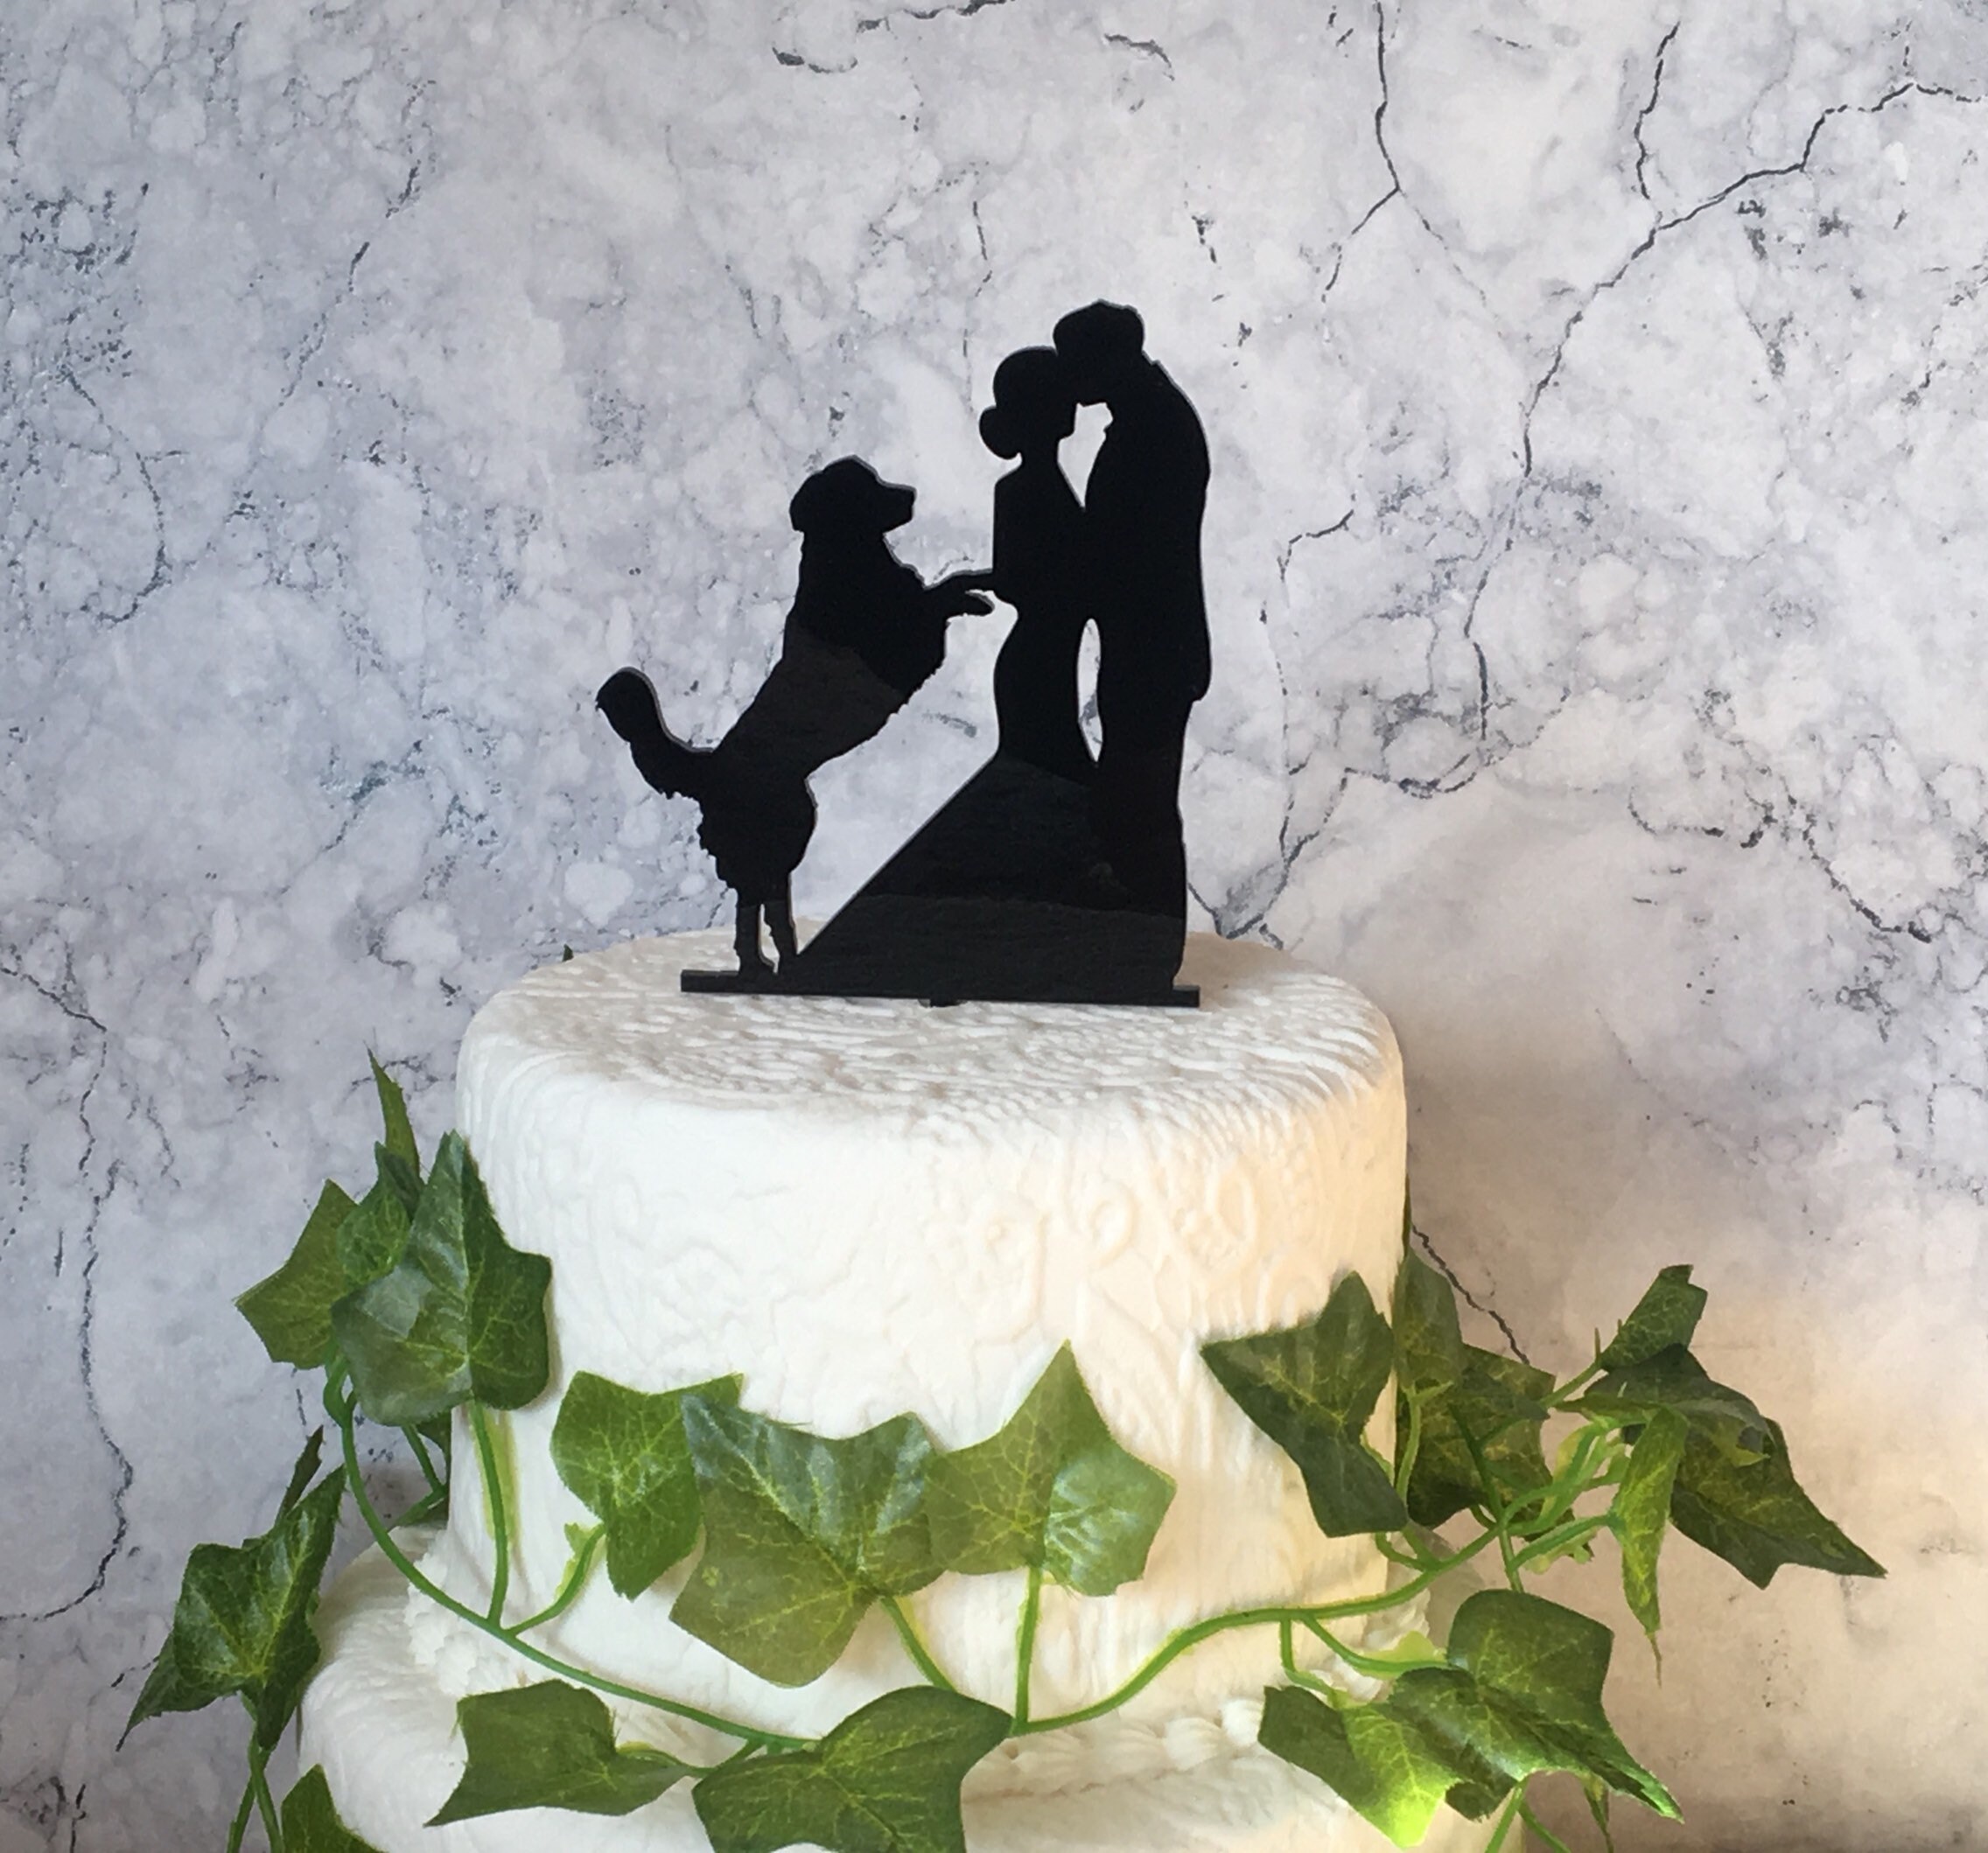 SILHOUETTE WEDDING CAKE TOPPER-BRIDE/GROOM/DOGS-BLACK ACRYLIC-DECORATION-SIGN 